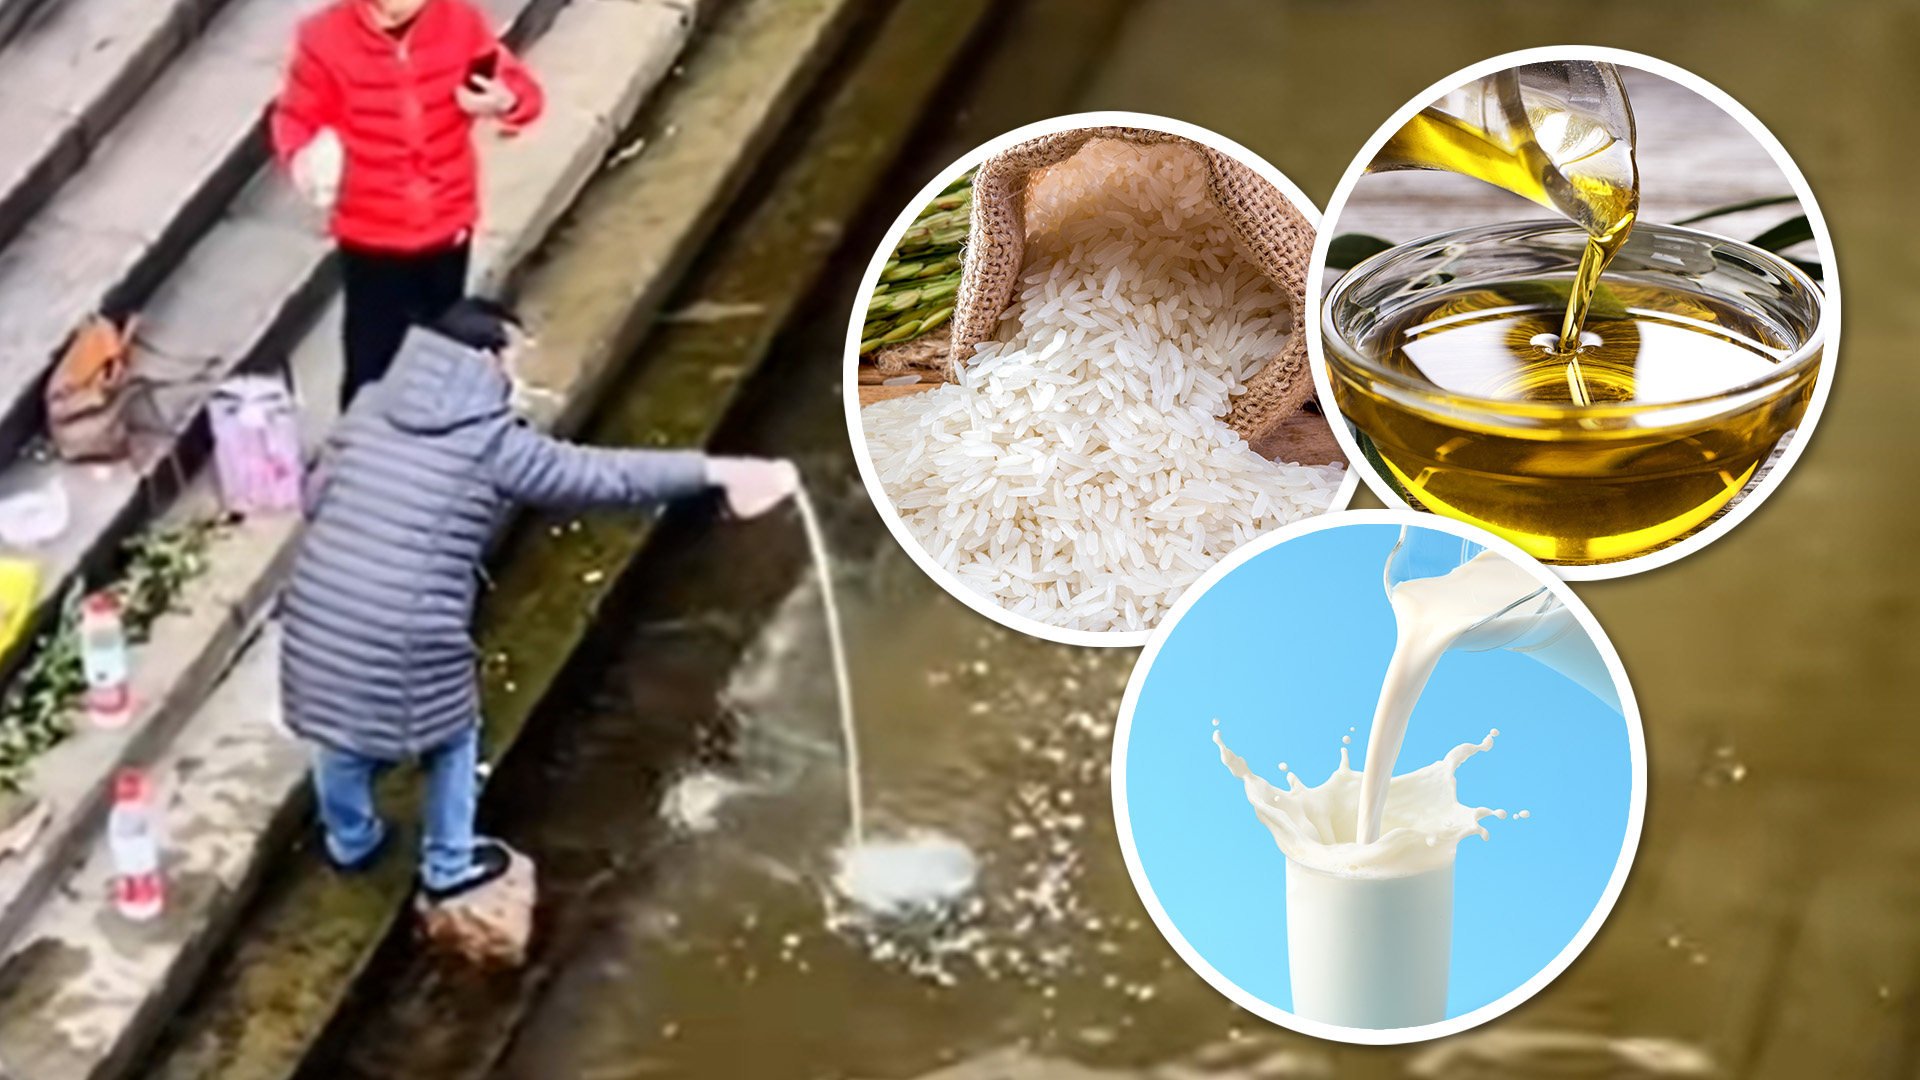 Two women who were filmed pouring a host of cooking ingredients into a river in China in the pursuit of “karma” have sparked an online ecological backlash. Photo: SCMP composite/Shutterstock/Douyin